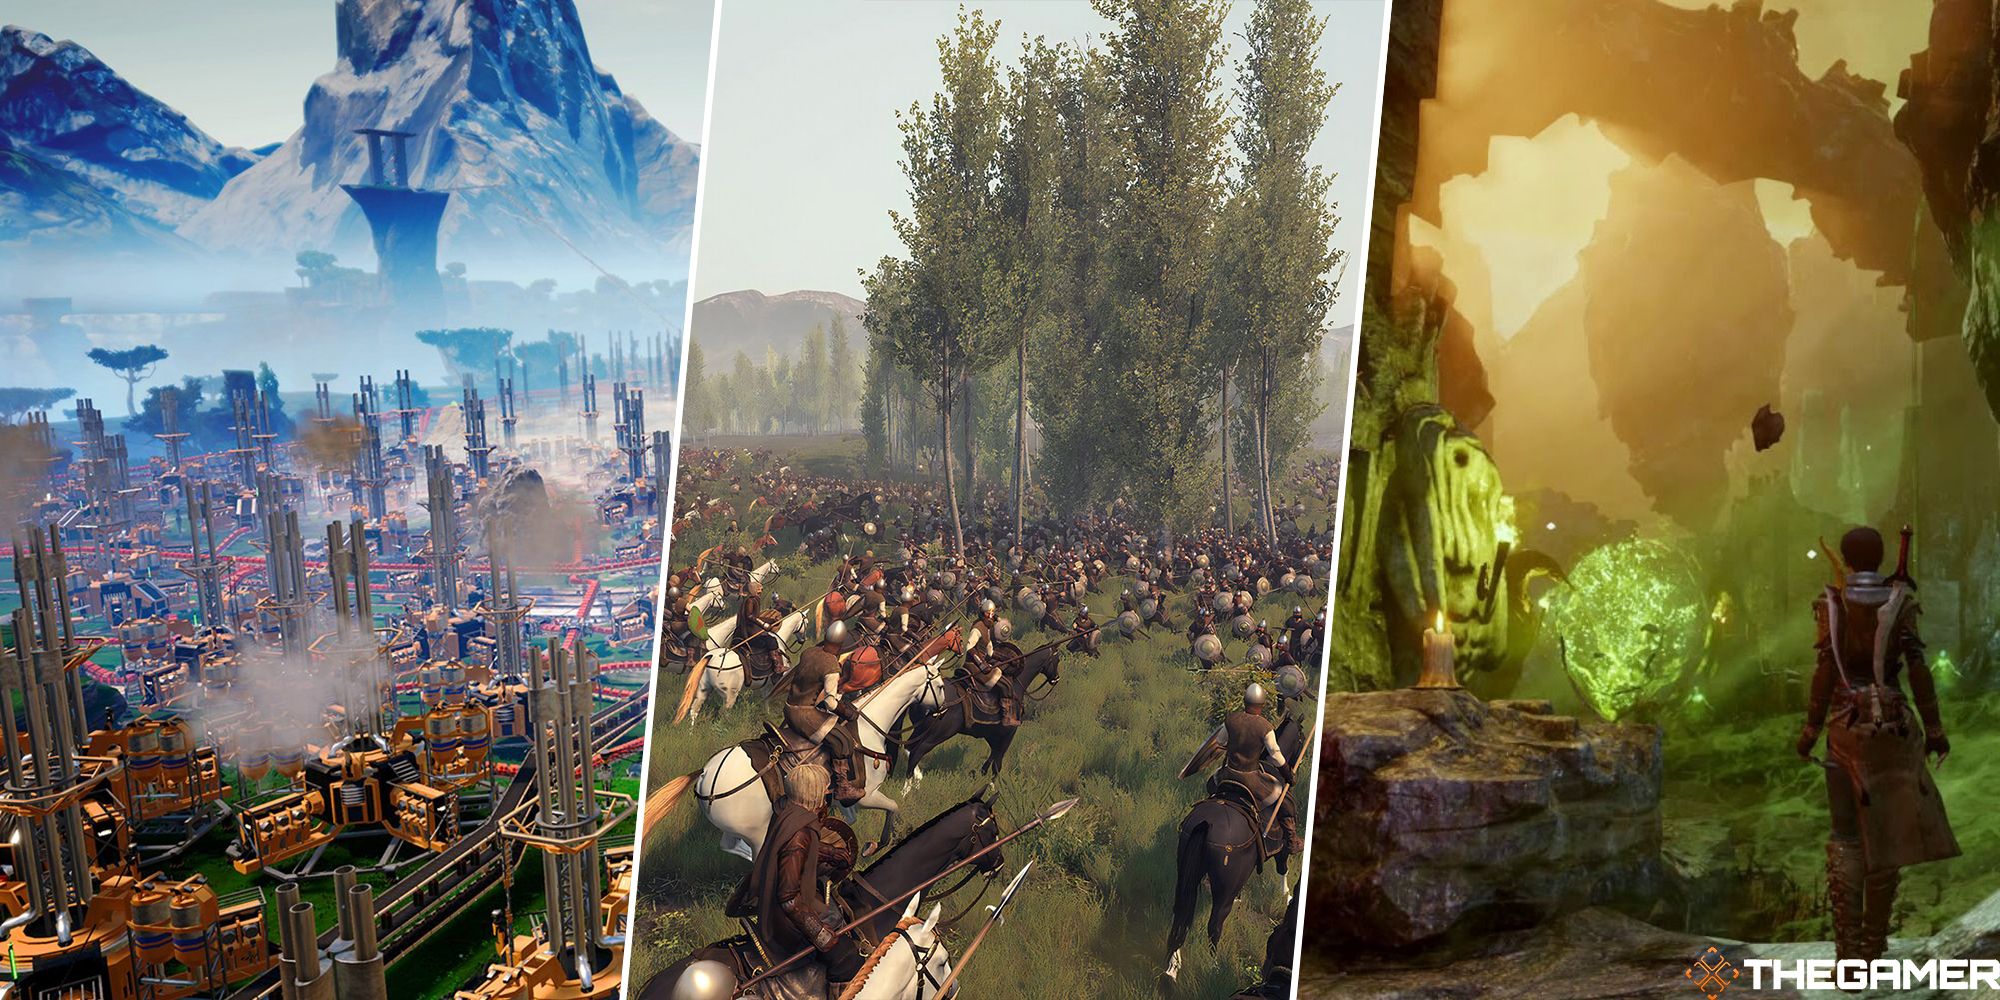 satisfactory, mount and blade 2 bannerlord, and dragon age inquisition split